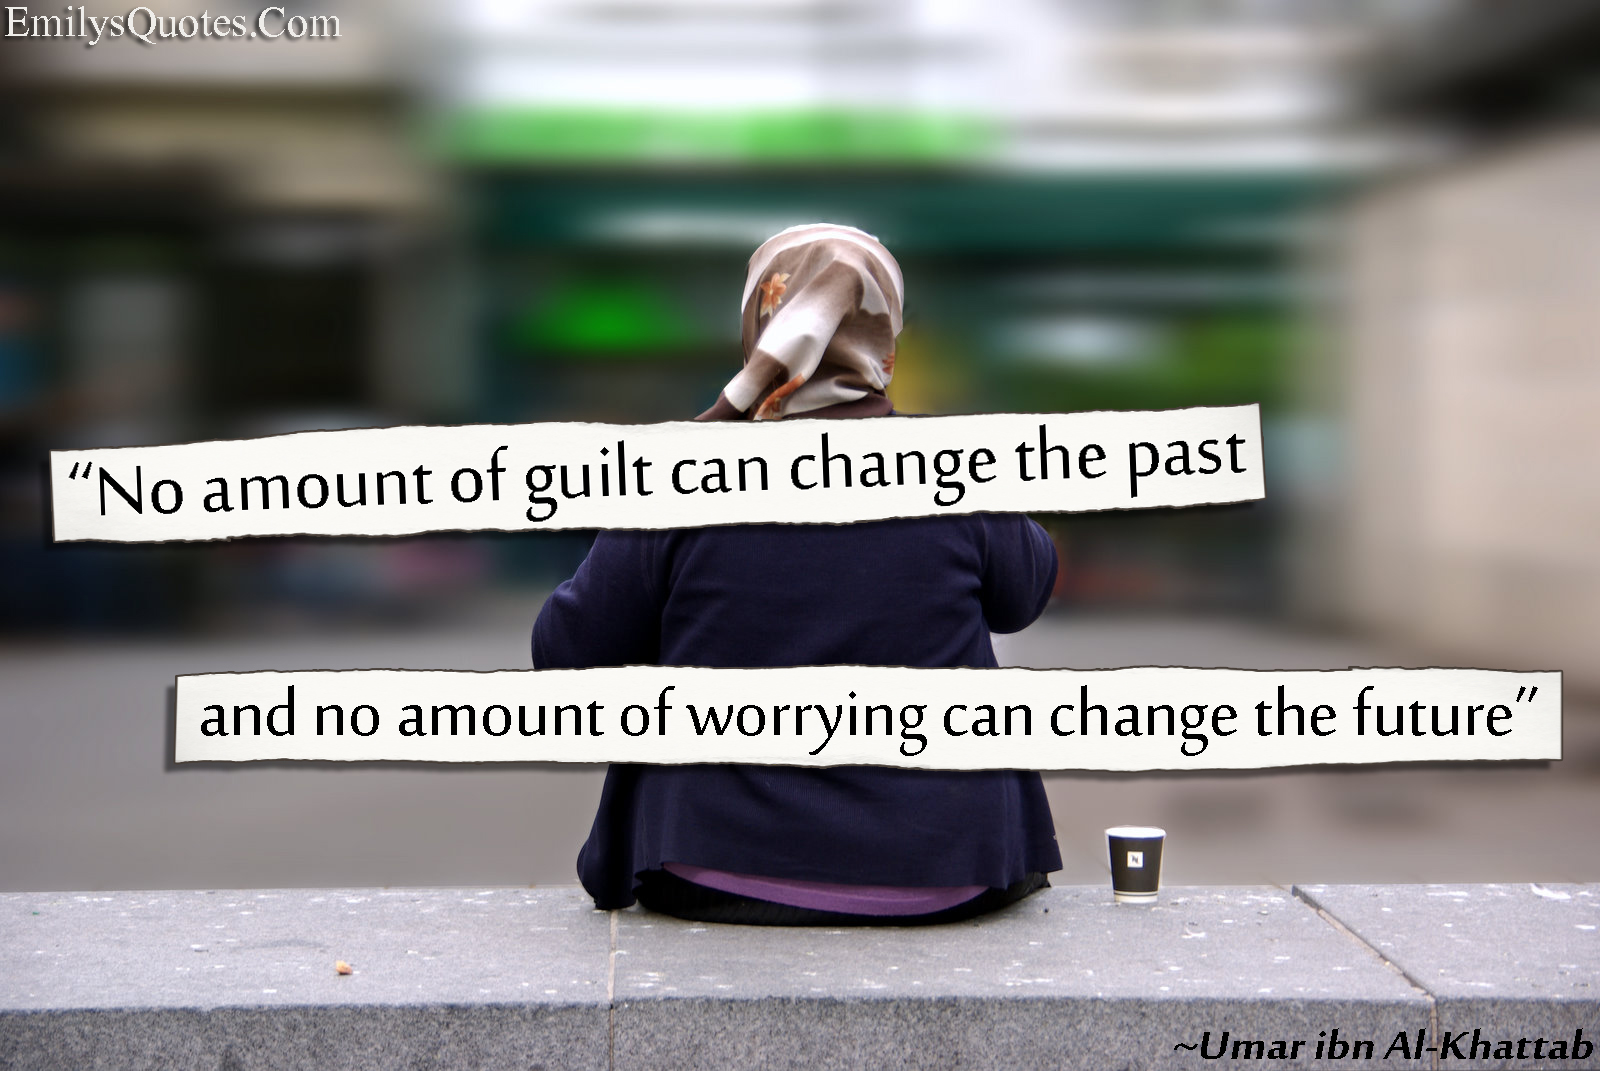 No amount of guilt can change the past and no amount of worrying can change the future